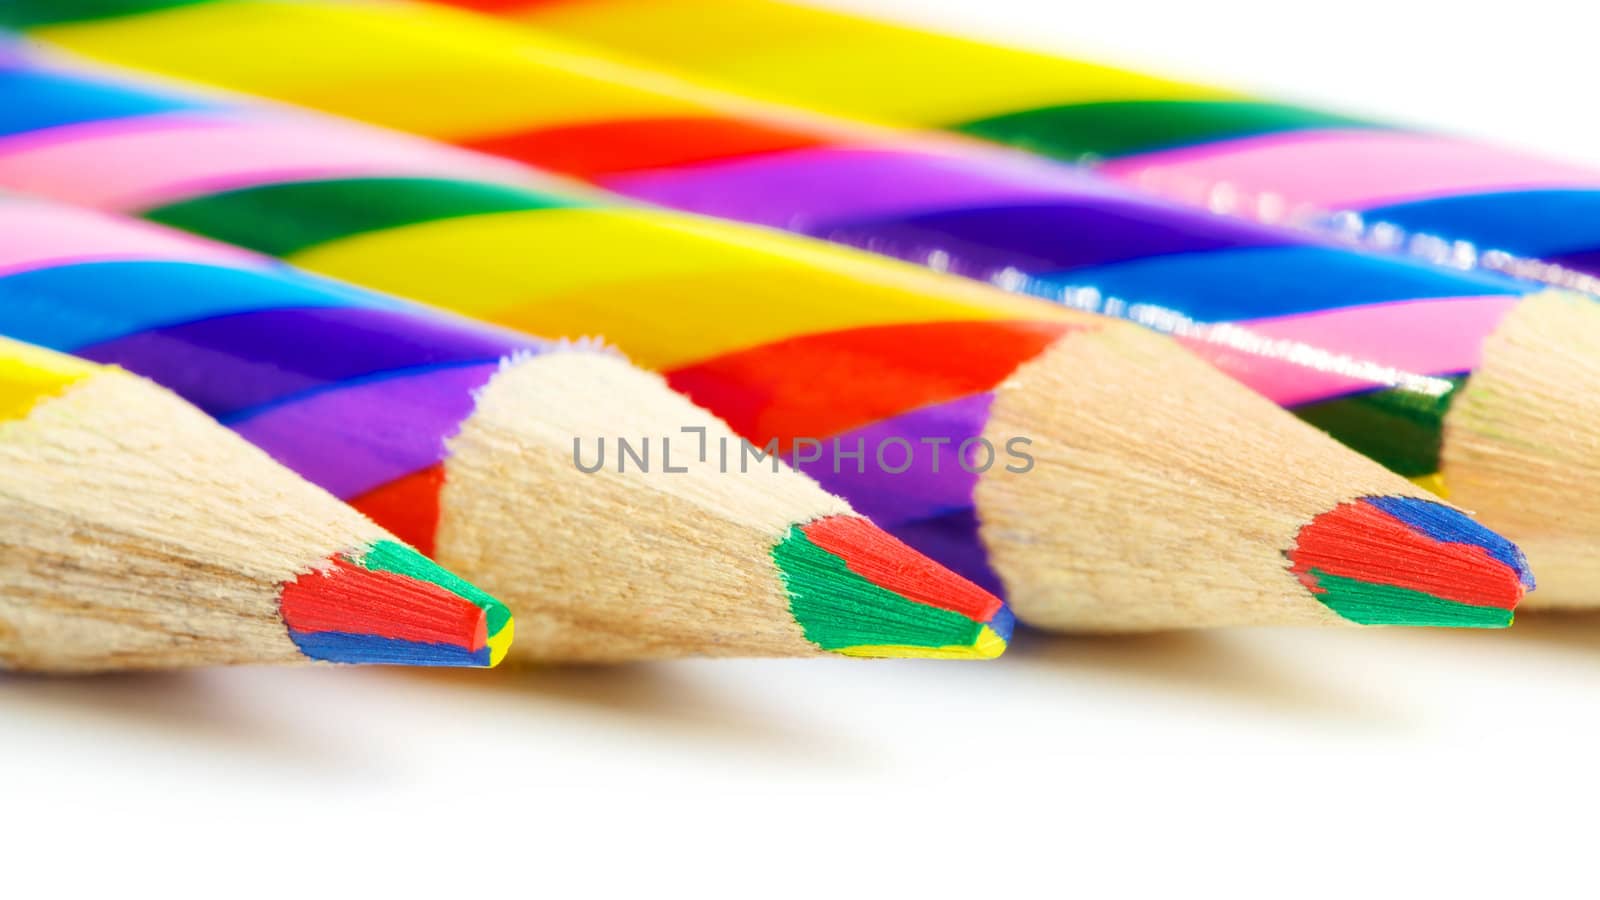 Colorful Pencils by petr_malyshev